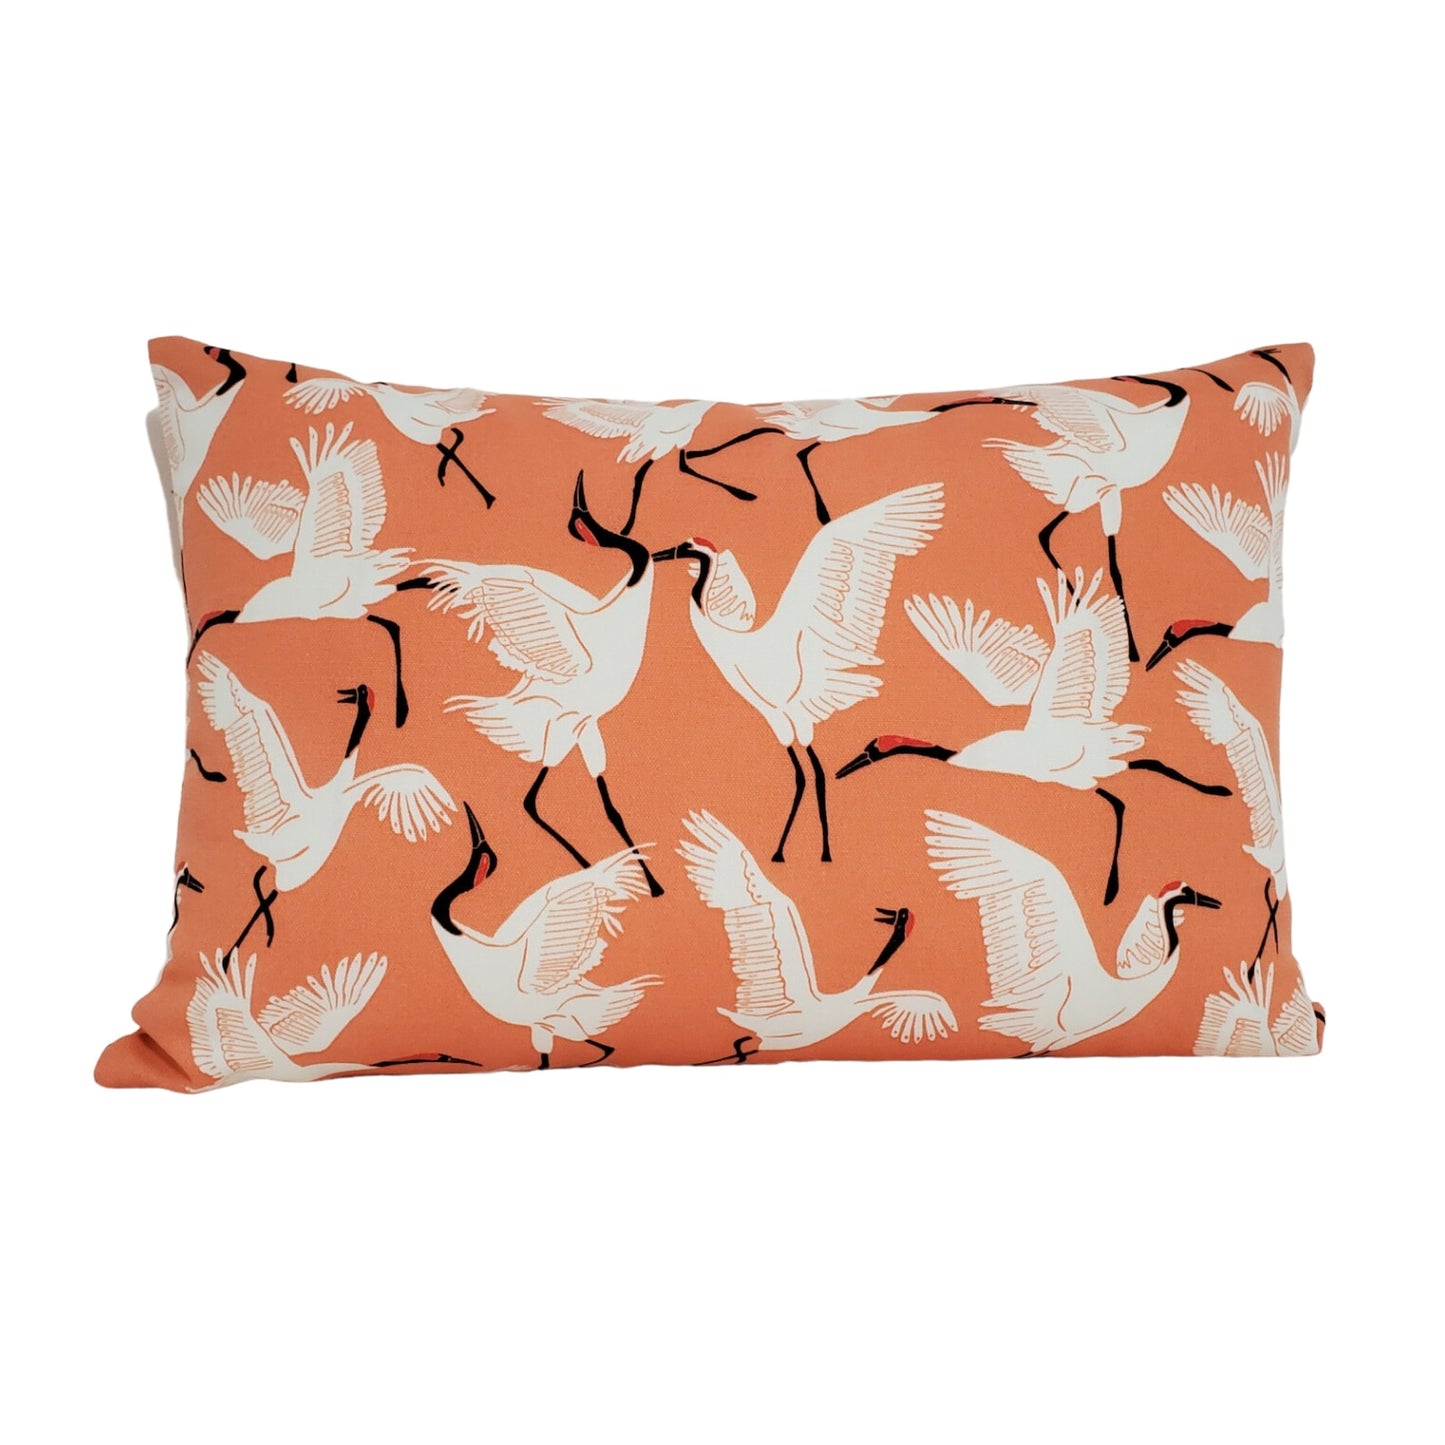 Novogratz Block Cranes Pillow Cover in Coral - OEKO TEX Sustainable / Available in Throw, Lumbar, Bolster Pillow Covers